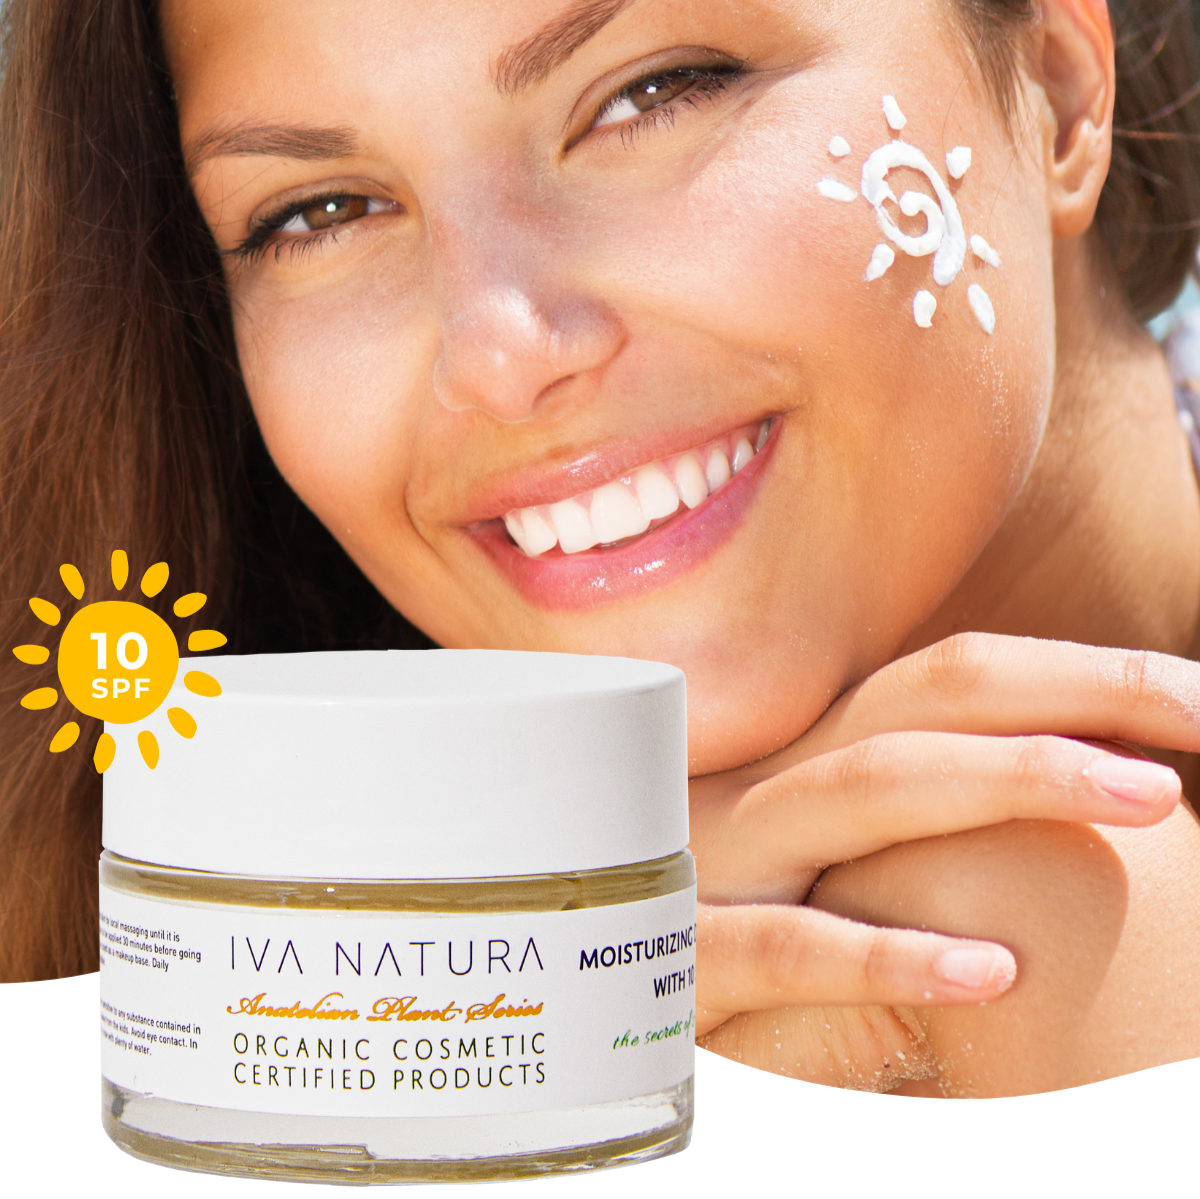 Check out our organic day cream with 10 SPF protection